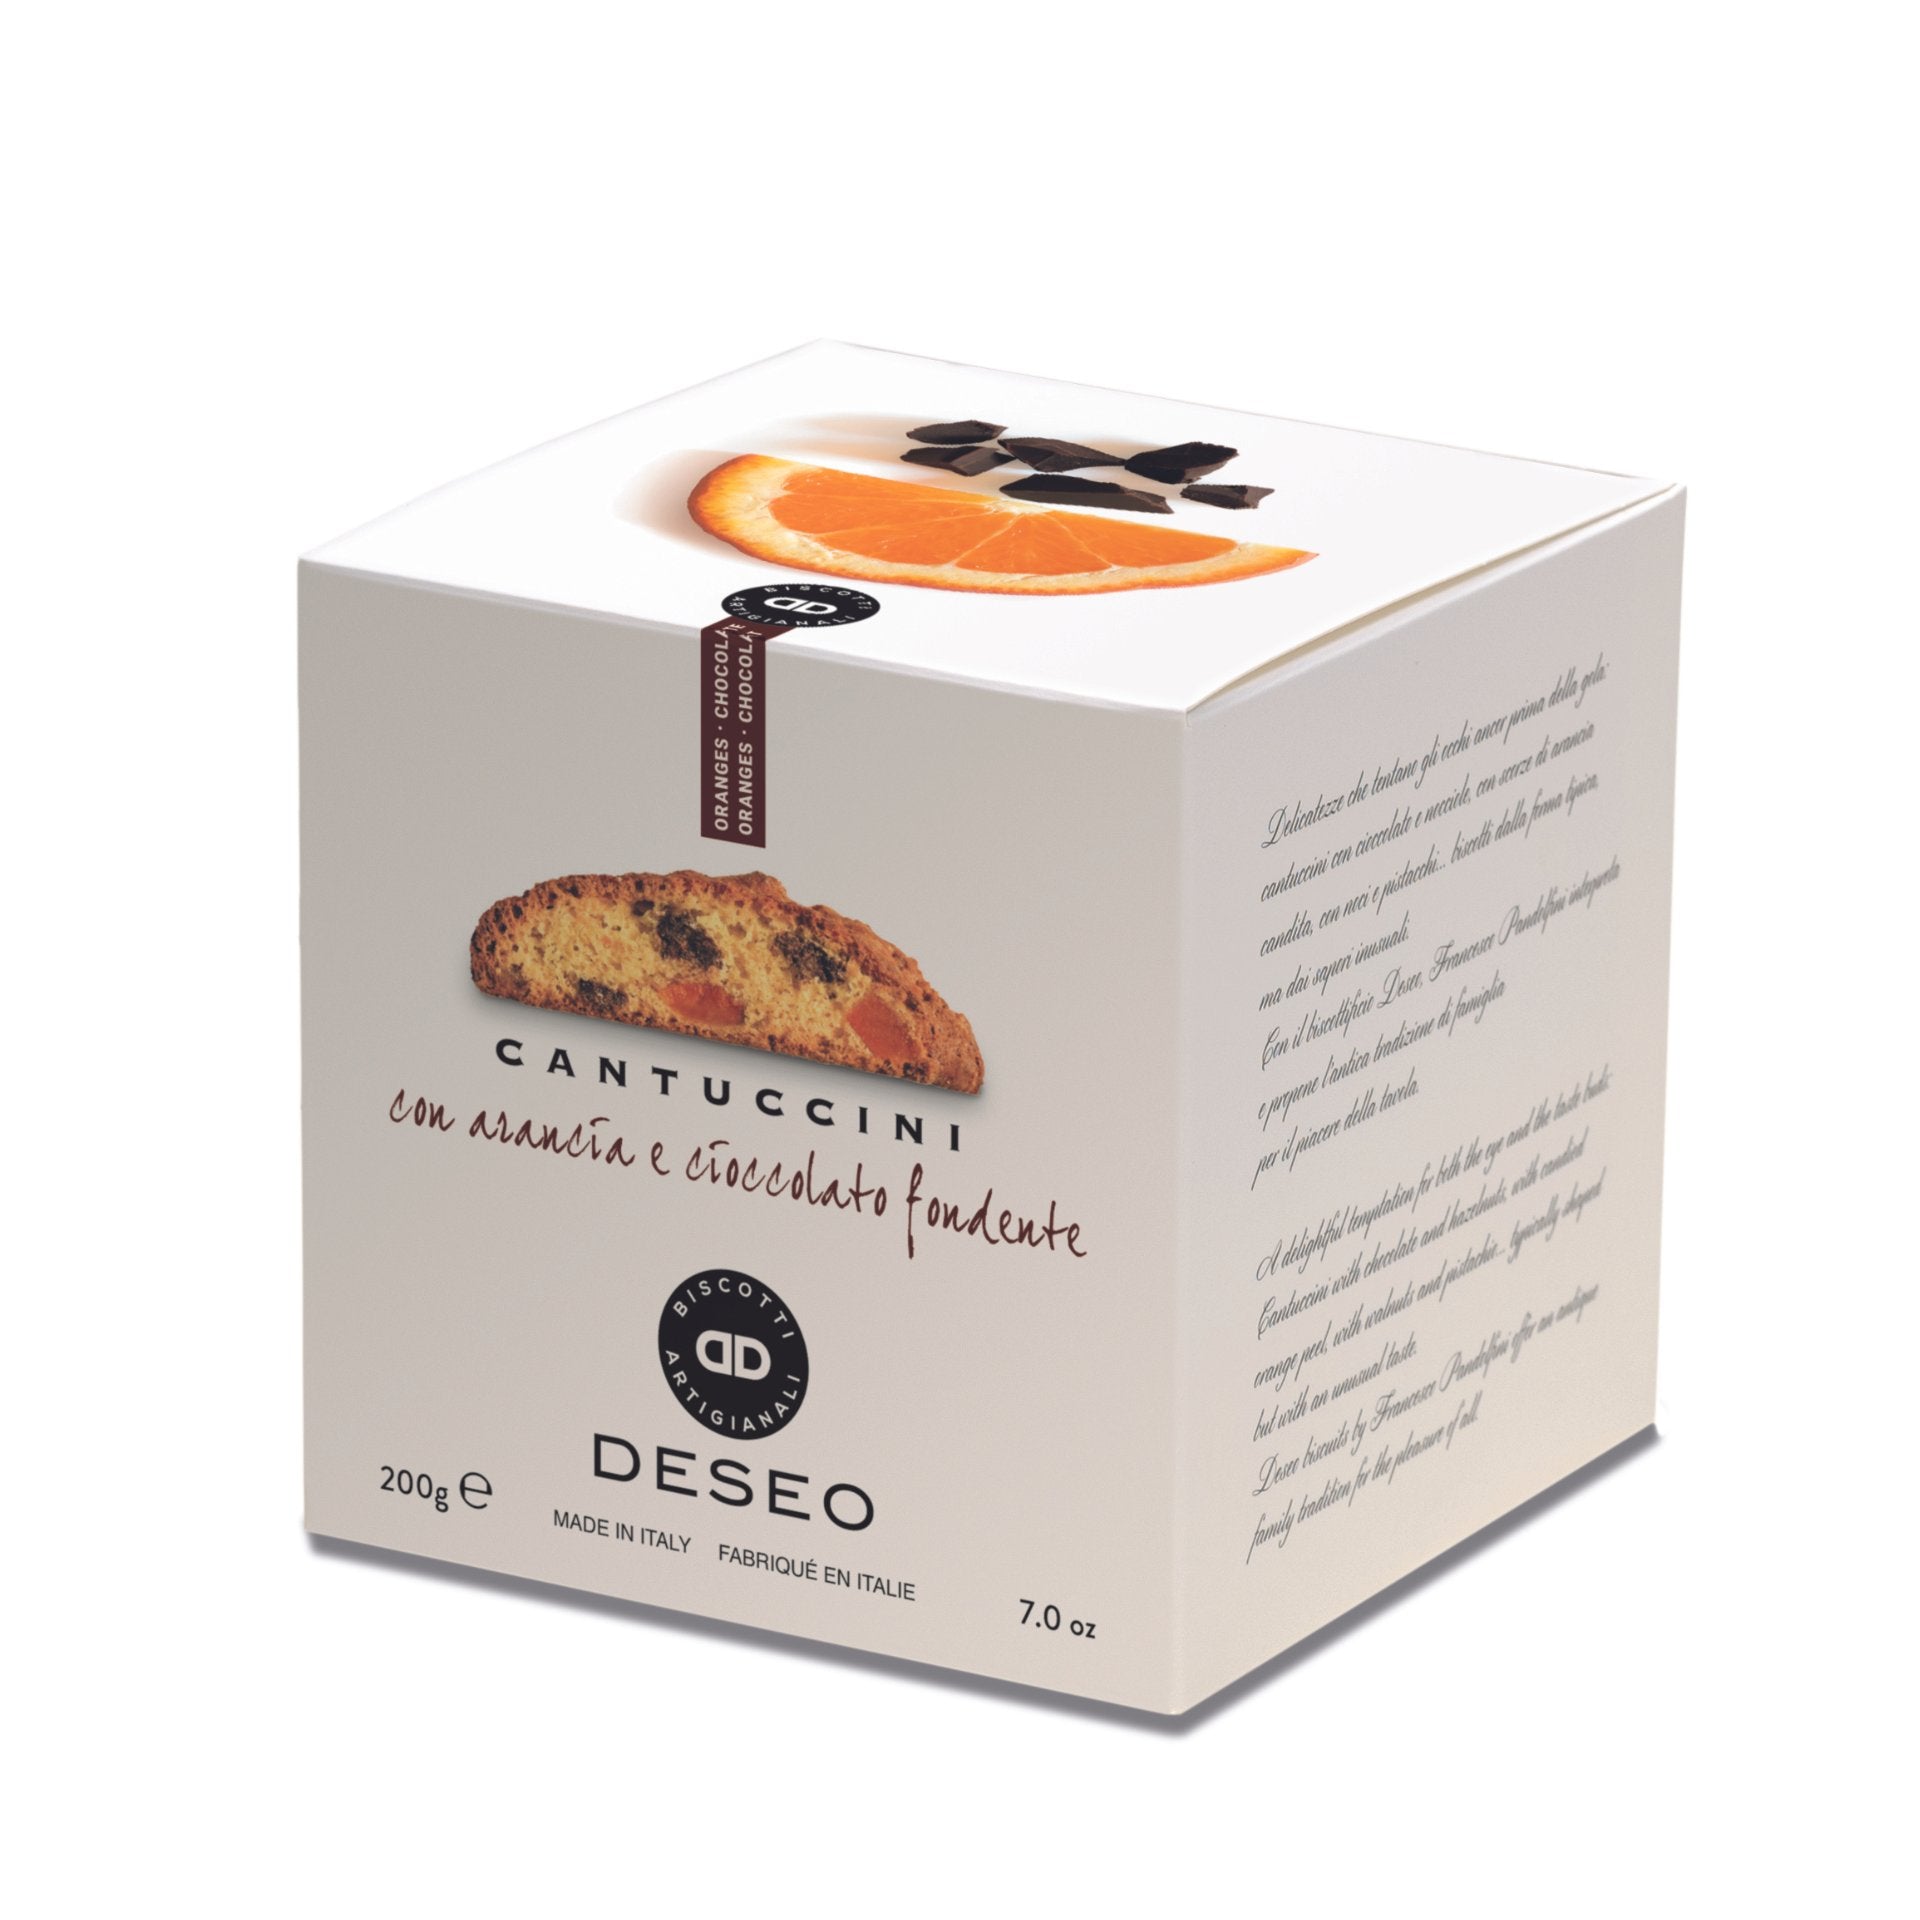 Deseo Cantuccini Toscani with Candied Orange & Dark Chocolate 200g (Box)  | Imported and distributed in the UK by Just Gourmet Foods